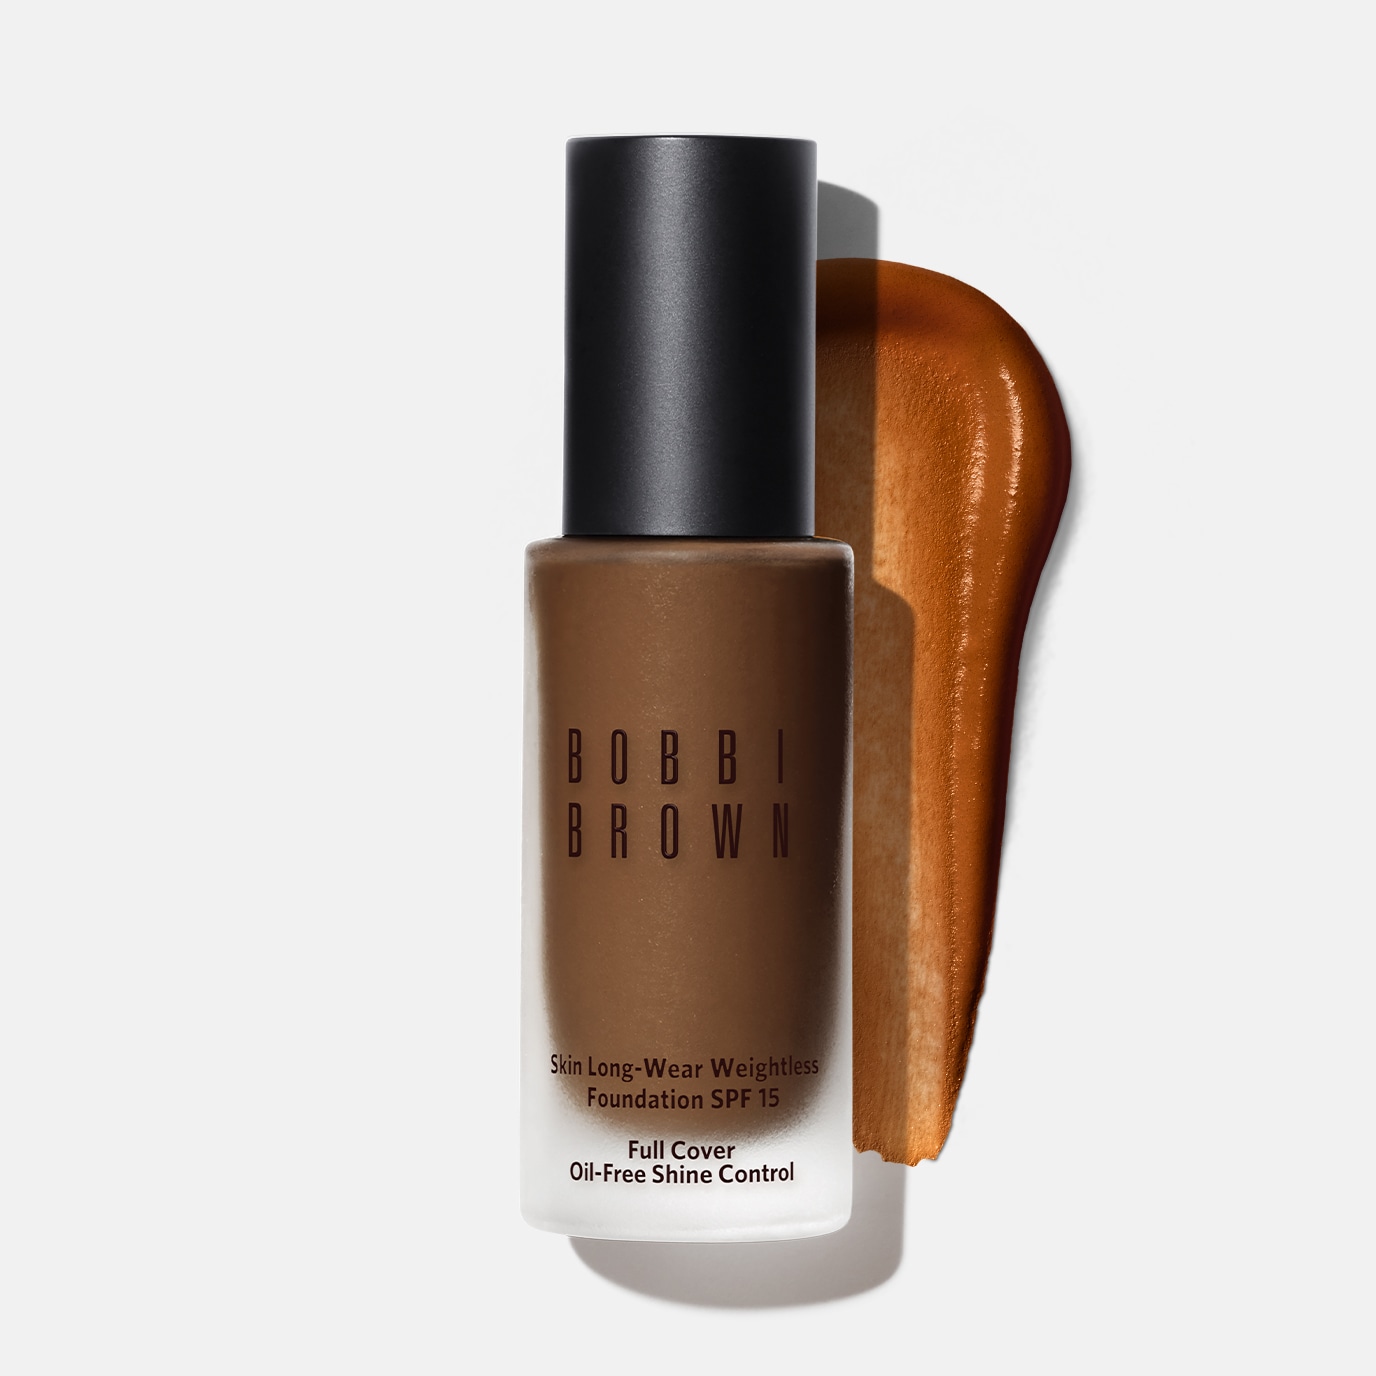 How To Correct Discoloration Bobbi Brown